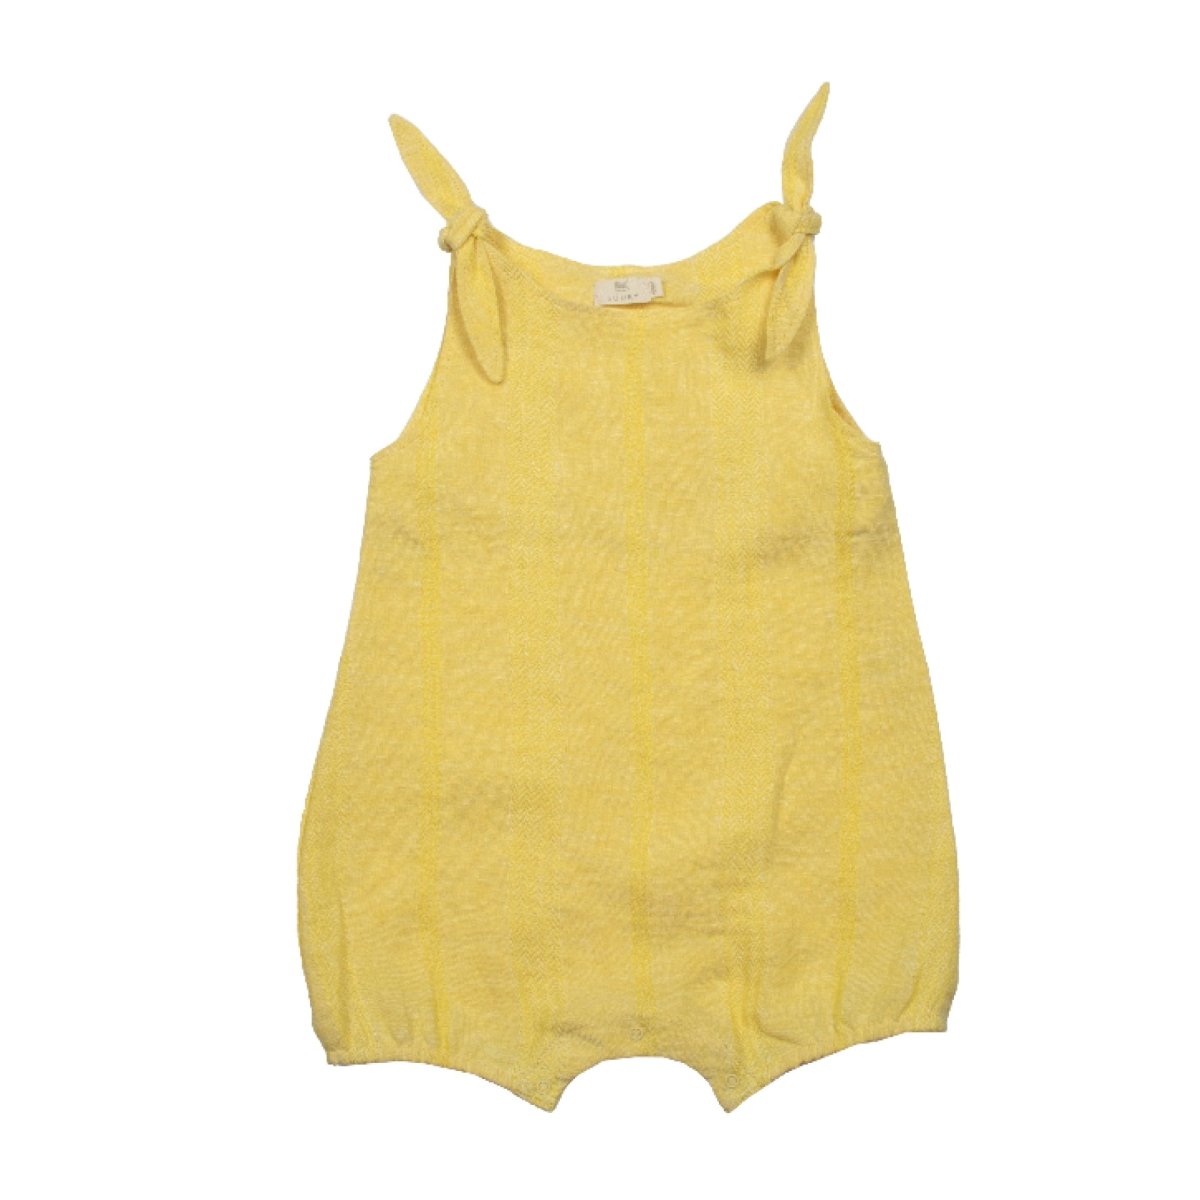 Textured Incaberry Linen Baby Relaxed Overall - Suuky Porto